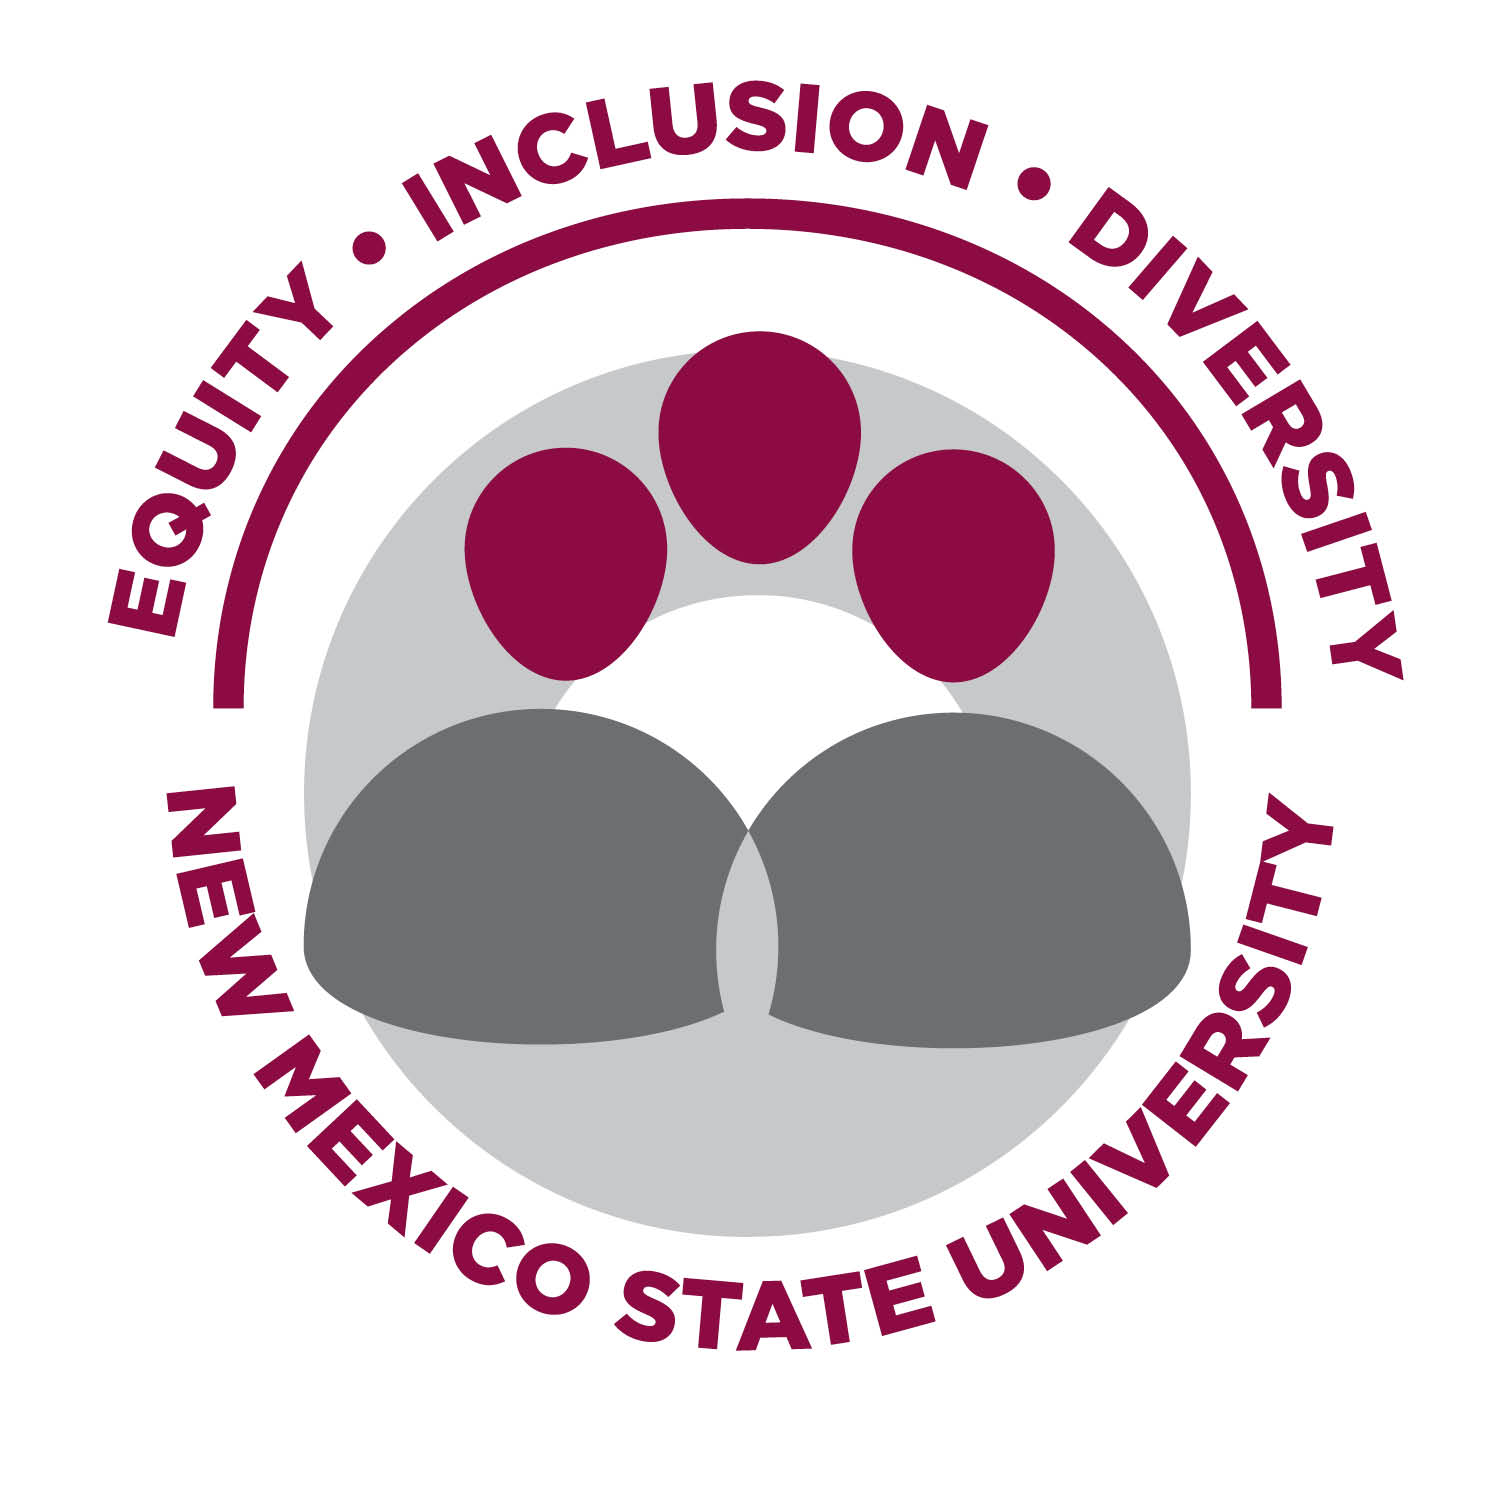 Logo of the Office of Equity, Inclusion and Diversity, The image is a circular logo for New Mexico State University emphasizing equity, inclusion, and diversity. At the center, there are abstract figures representing three stylized human heads and shoulders. The heads are depicted as maroon-colored ovals, and the shoulders are in gray. Surrounding this central image is a circular maroon border. The text "EQUITY • INCLUSION • DIVERSITY" is written in maroon, curving along the top inside edge of the border, while "NEW MEXICO STATE UNIVERSITY" is similarly written in maroon along the bottom inside edge. The background of the image is white.